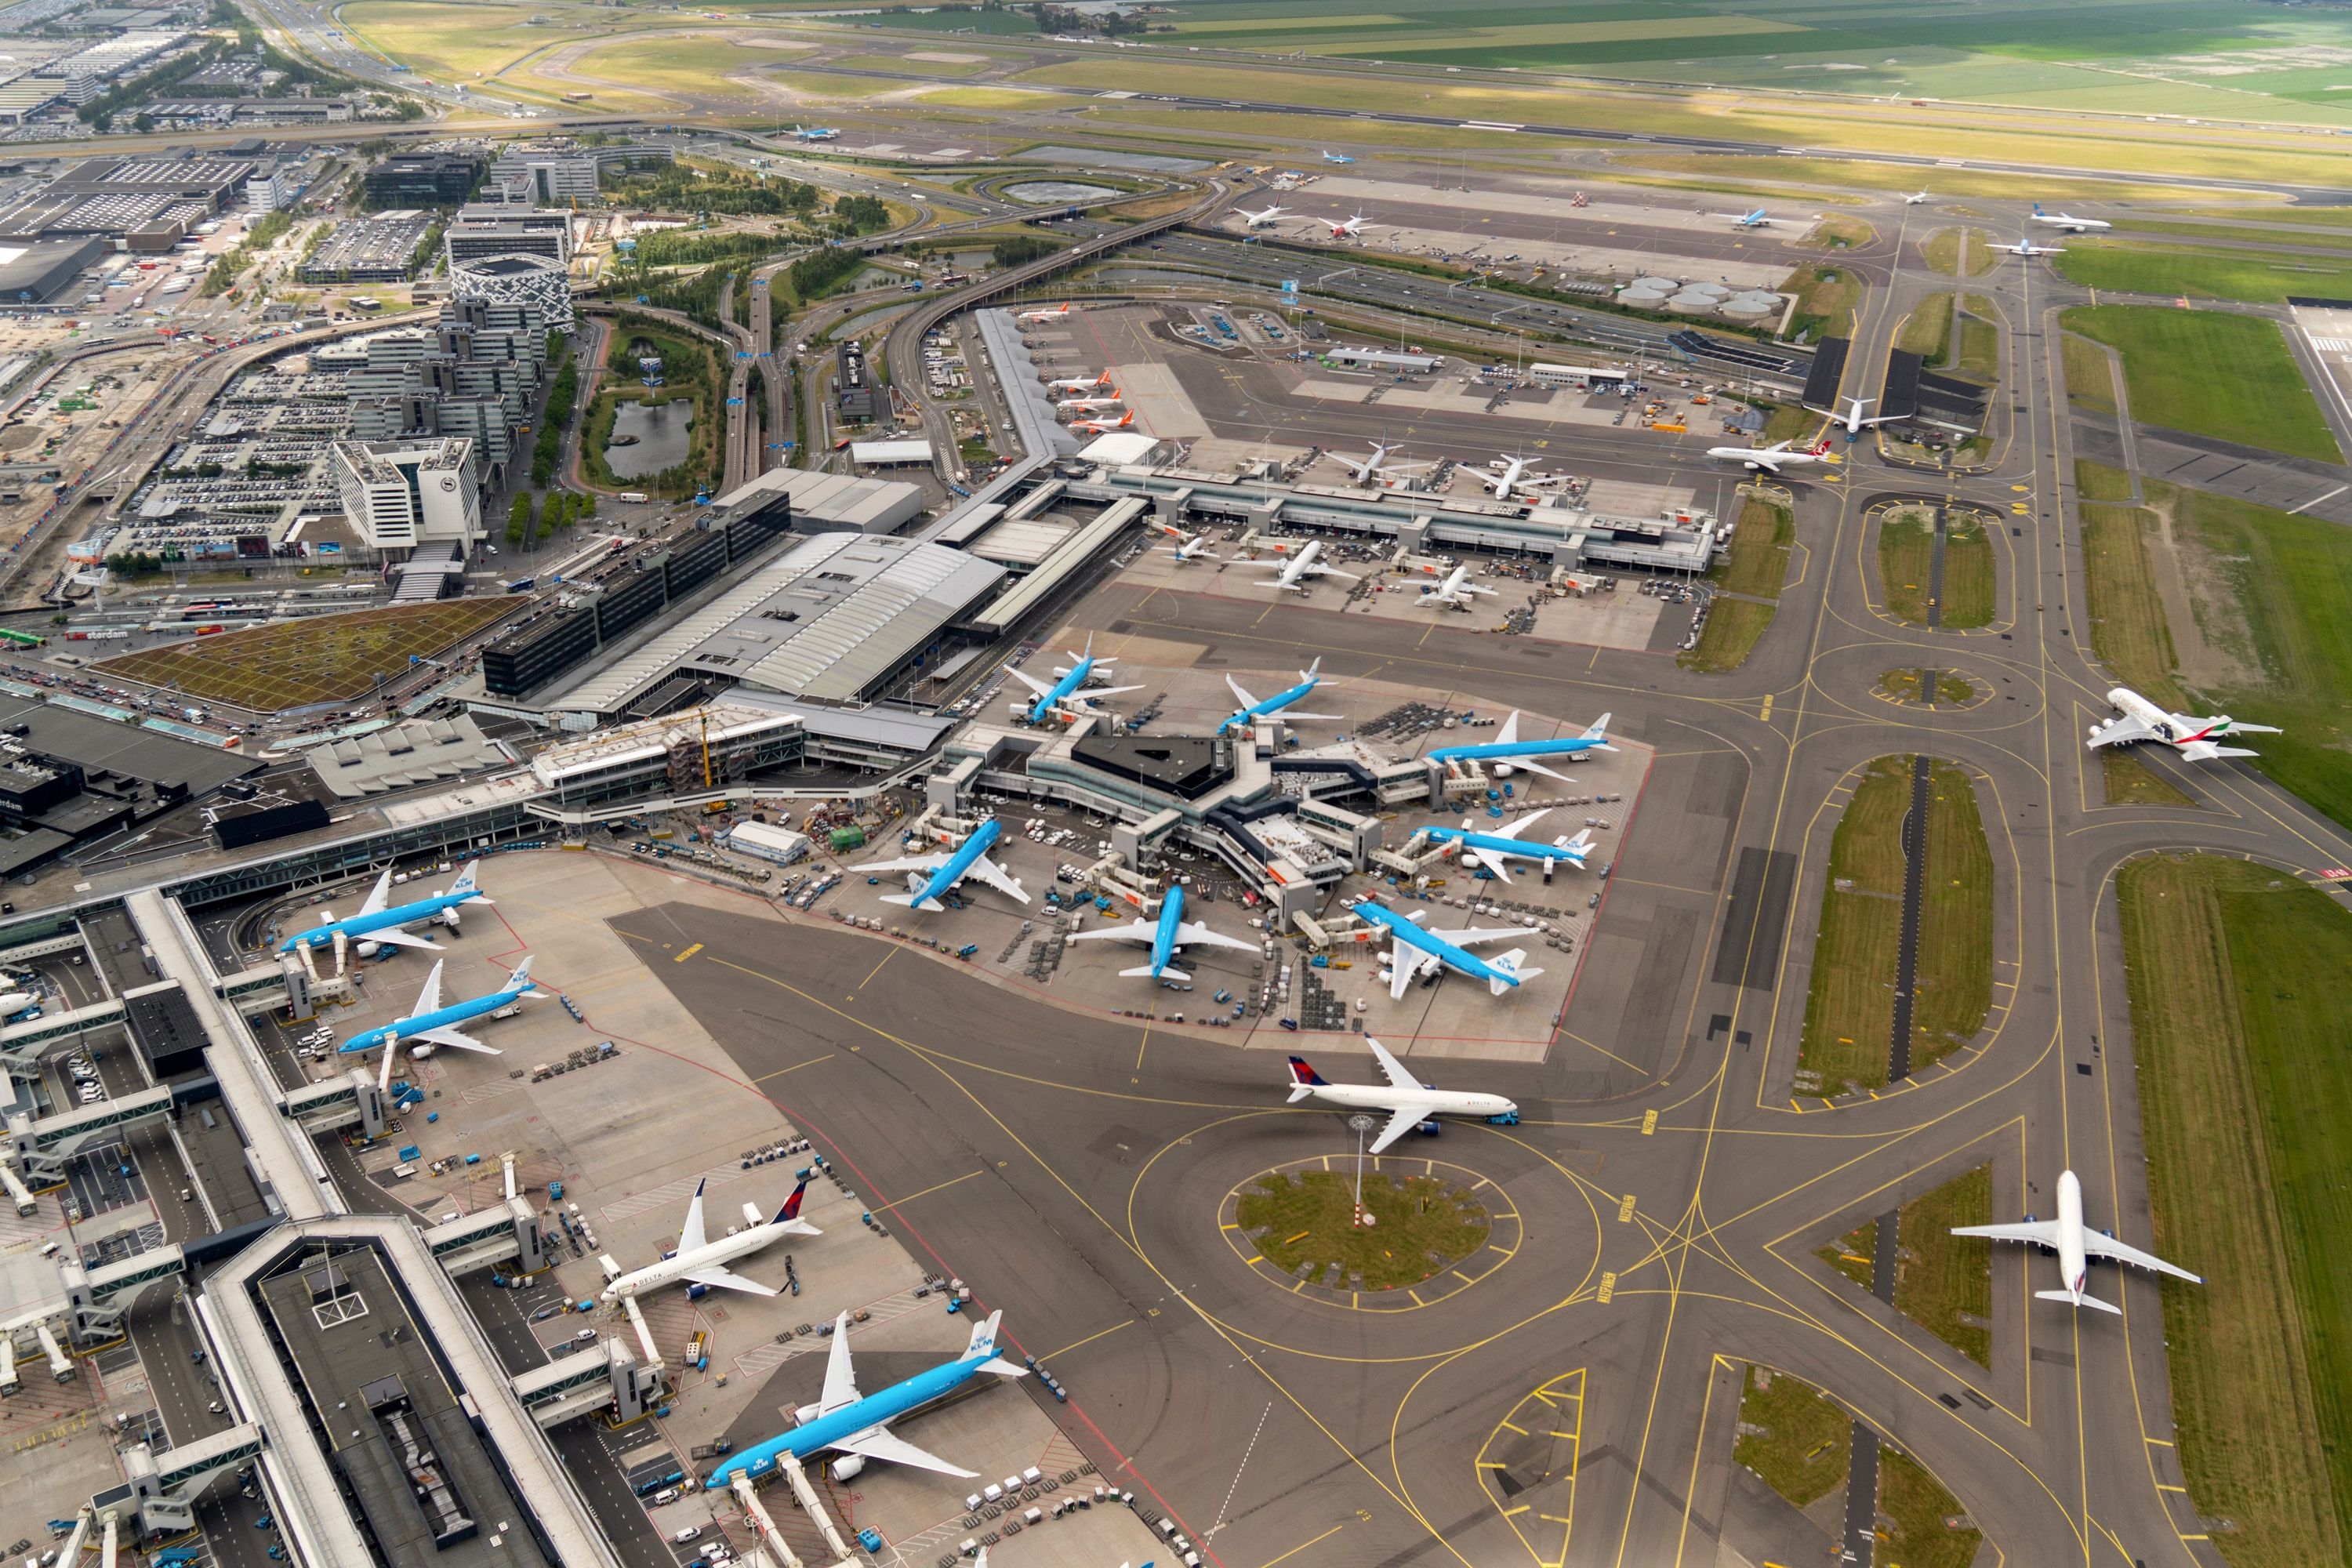 aircraft parked at Amsterdam Schiphol airport